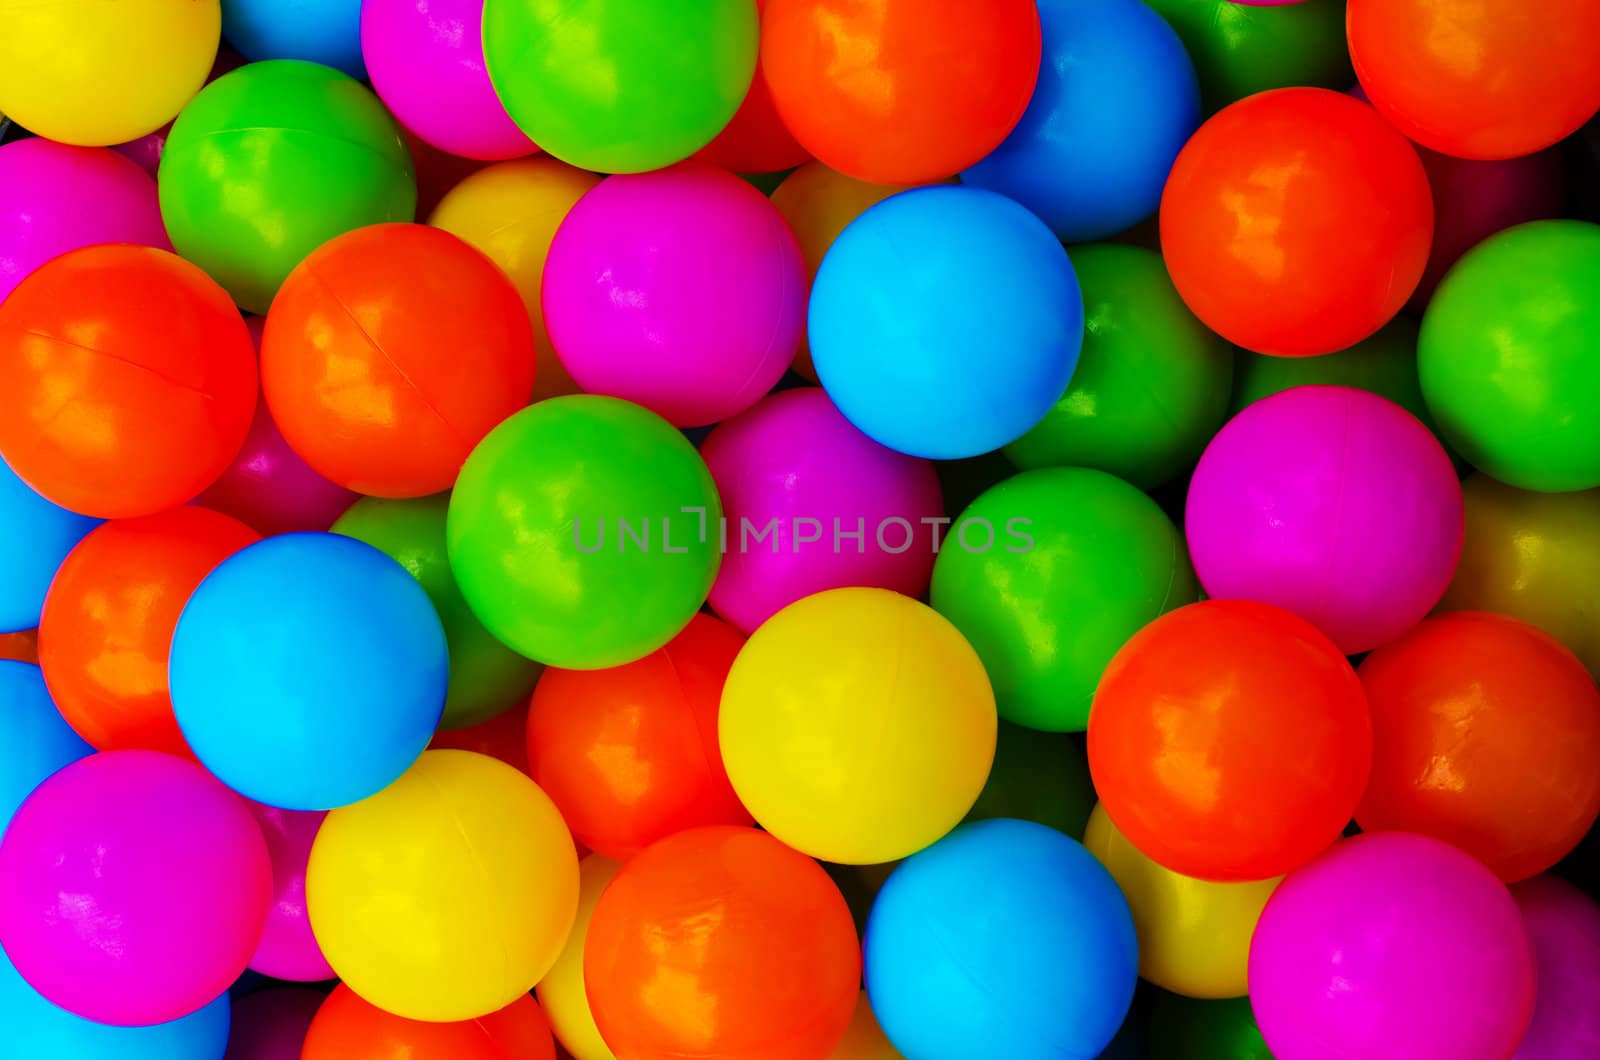 Bright coloured play pit balls